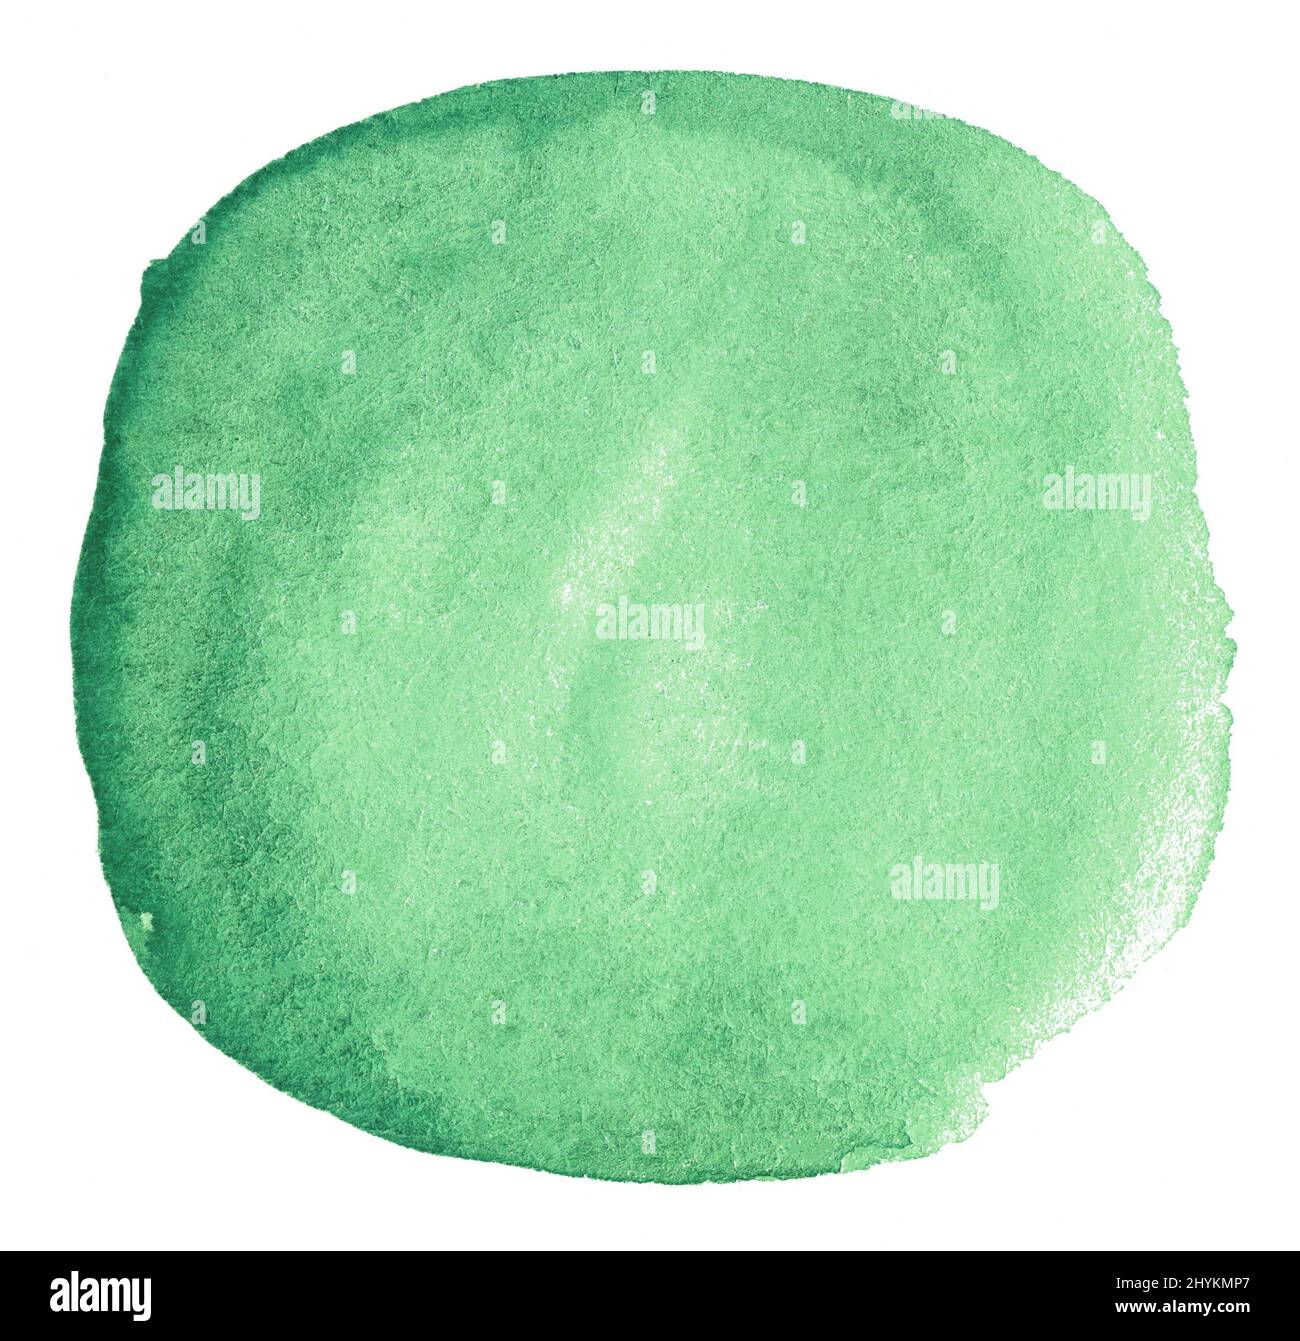 Abstract mint green watercolor shape. Watercolor hand drawn stain isolated on white Stock Photo